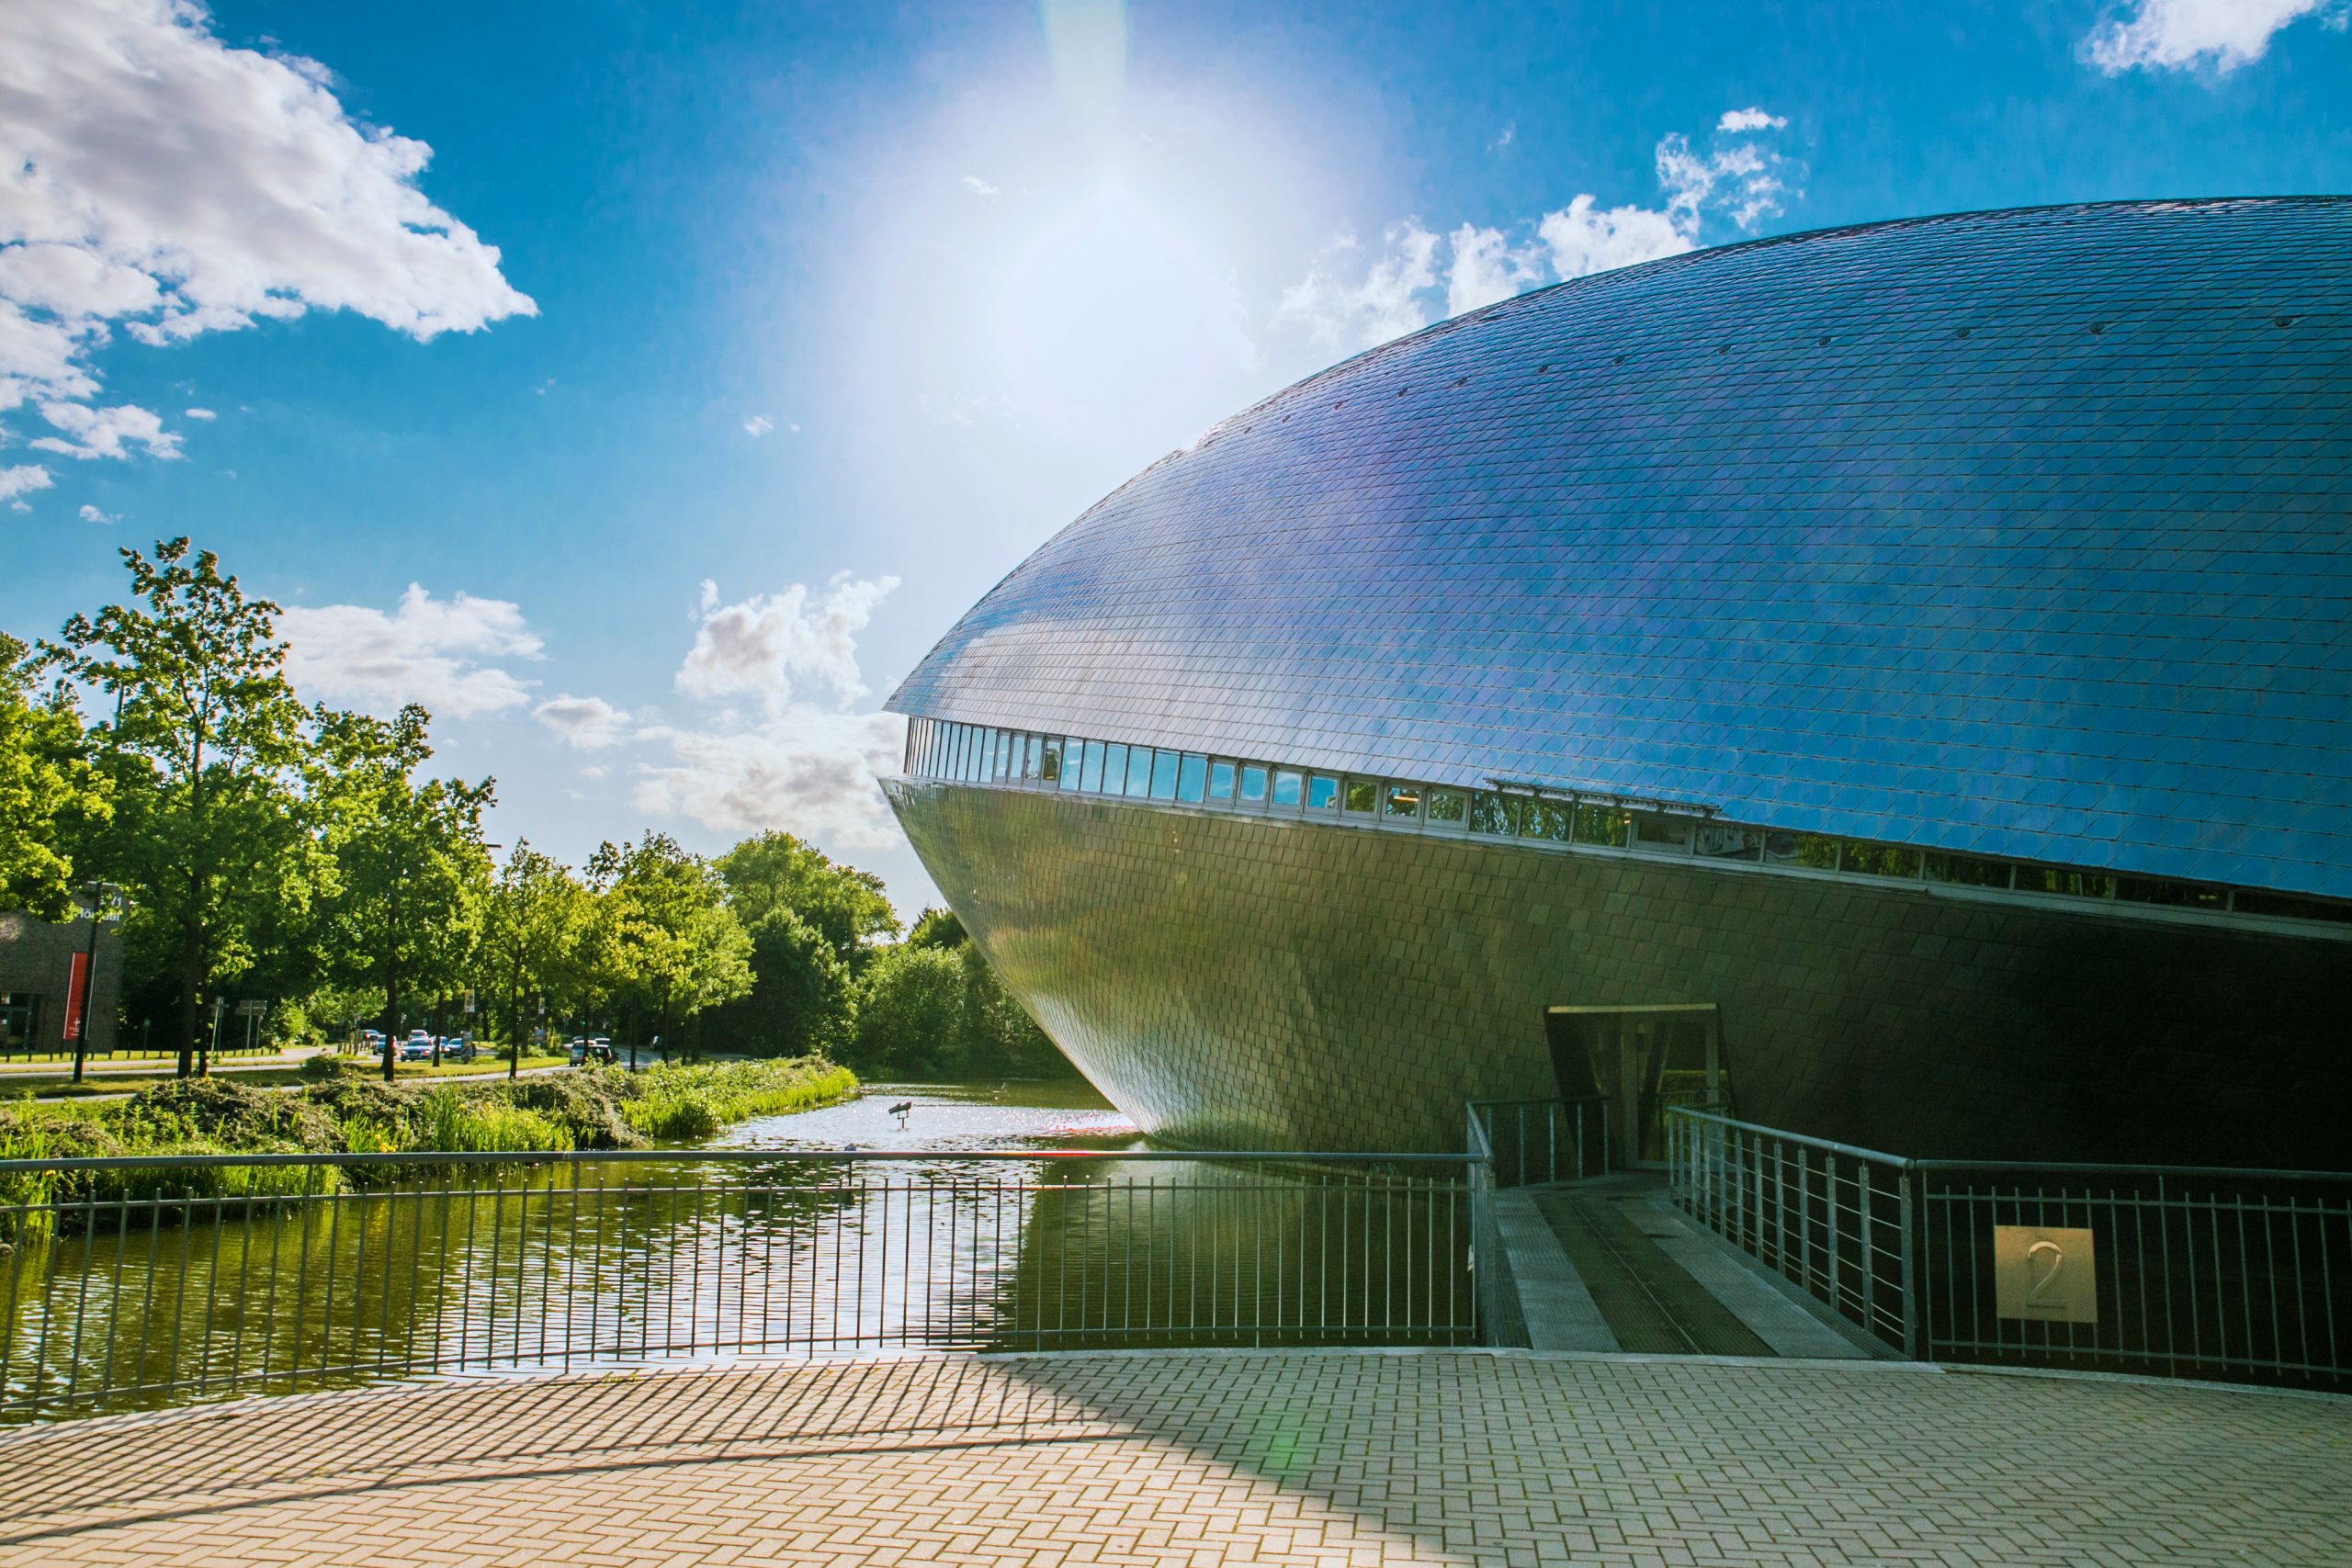 A shot of the Universum in Bremen on a sunny day.